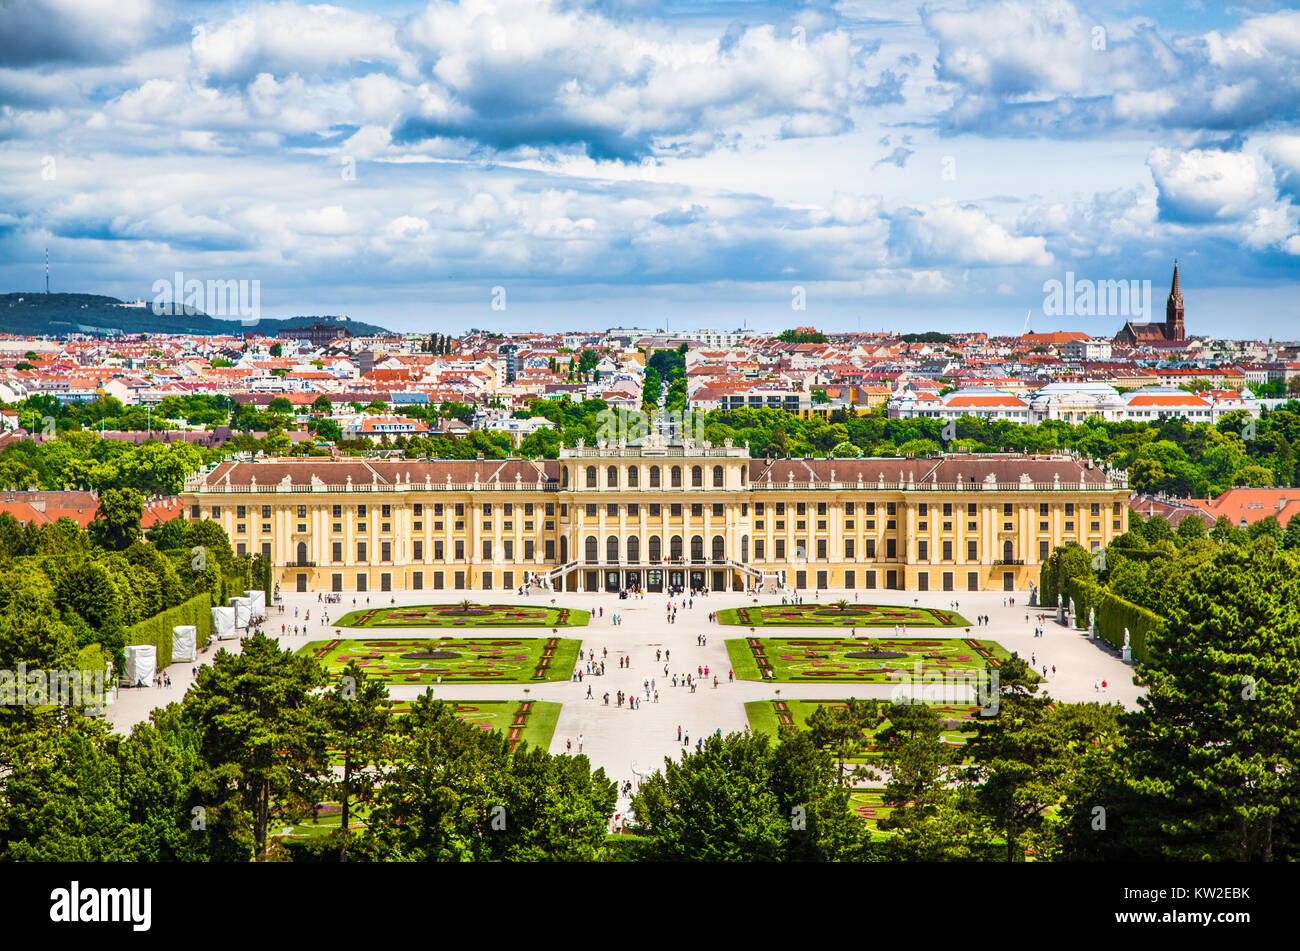 Beautiful view of famous Schonbrunn Palace with Great Parterre garden in Vienna, Austria Stock Photo